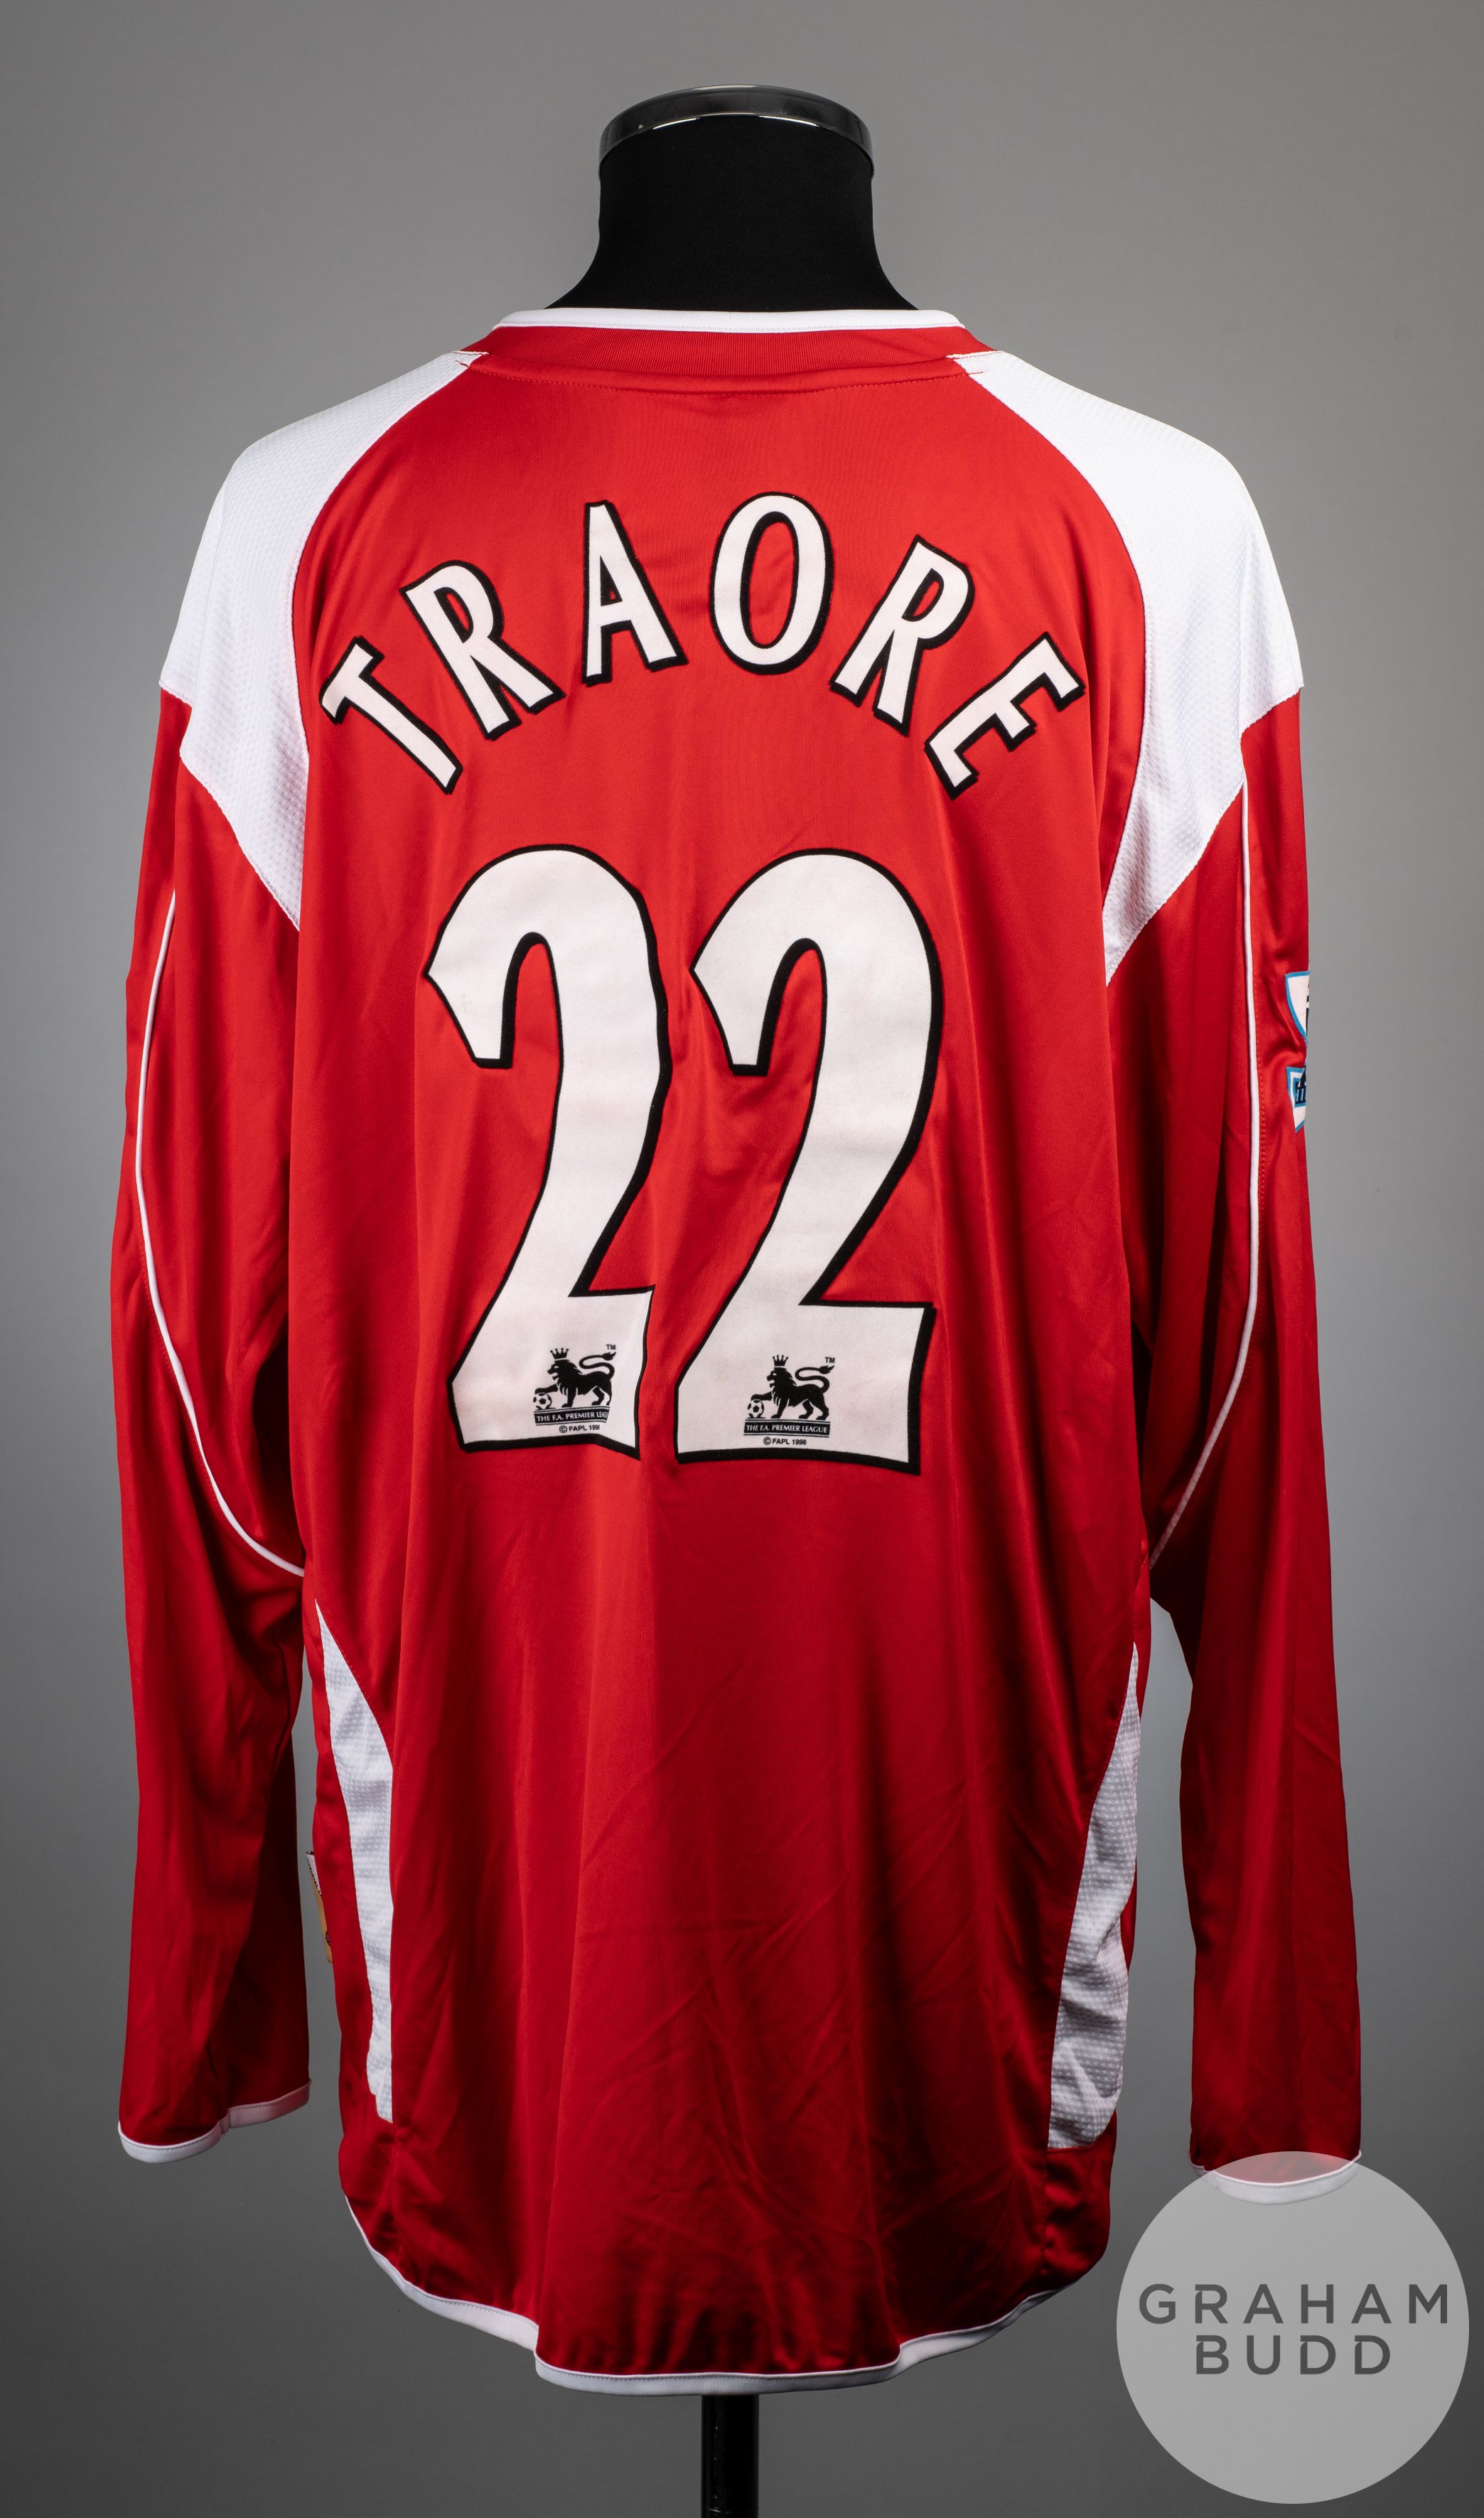 Djimi Traore red and white No.22 Charlton Athletic match issued long-sleeved shirt, 2006-07 - Image 2 of 2